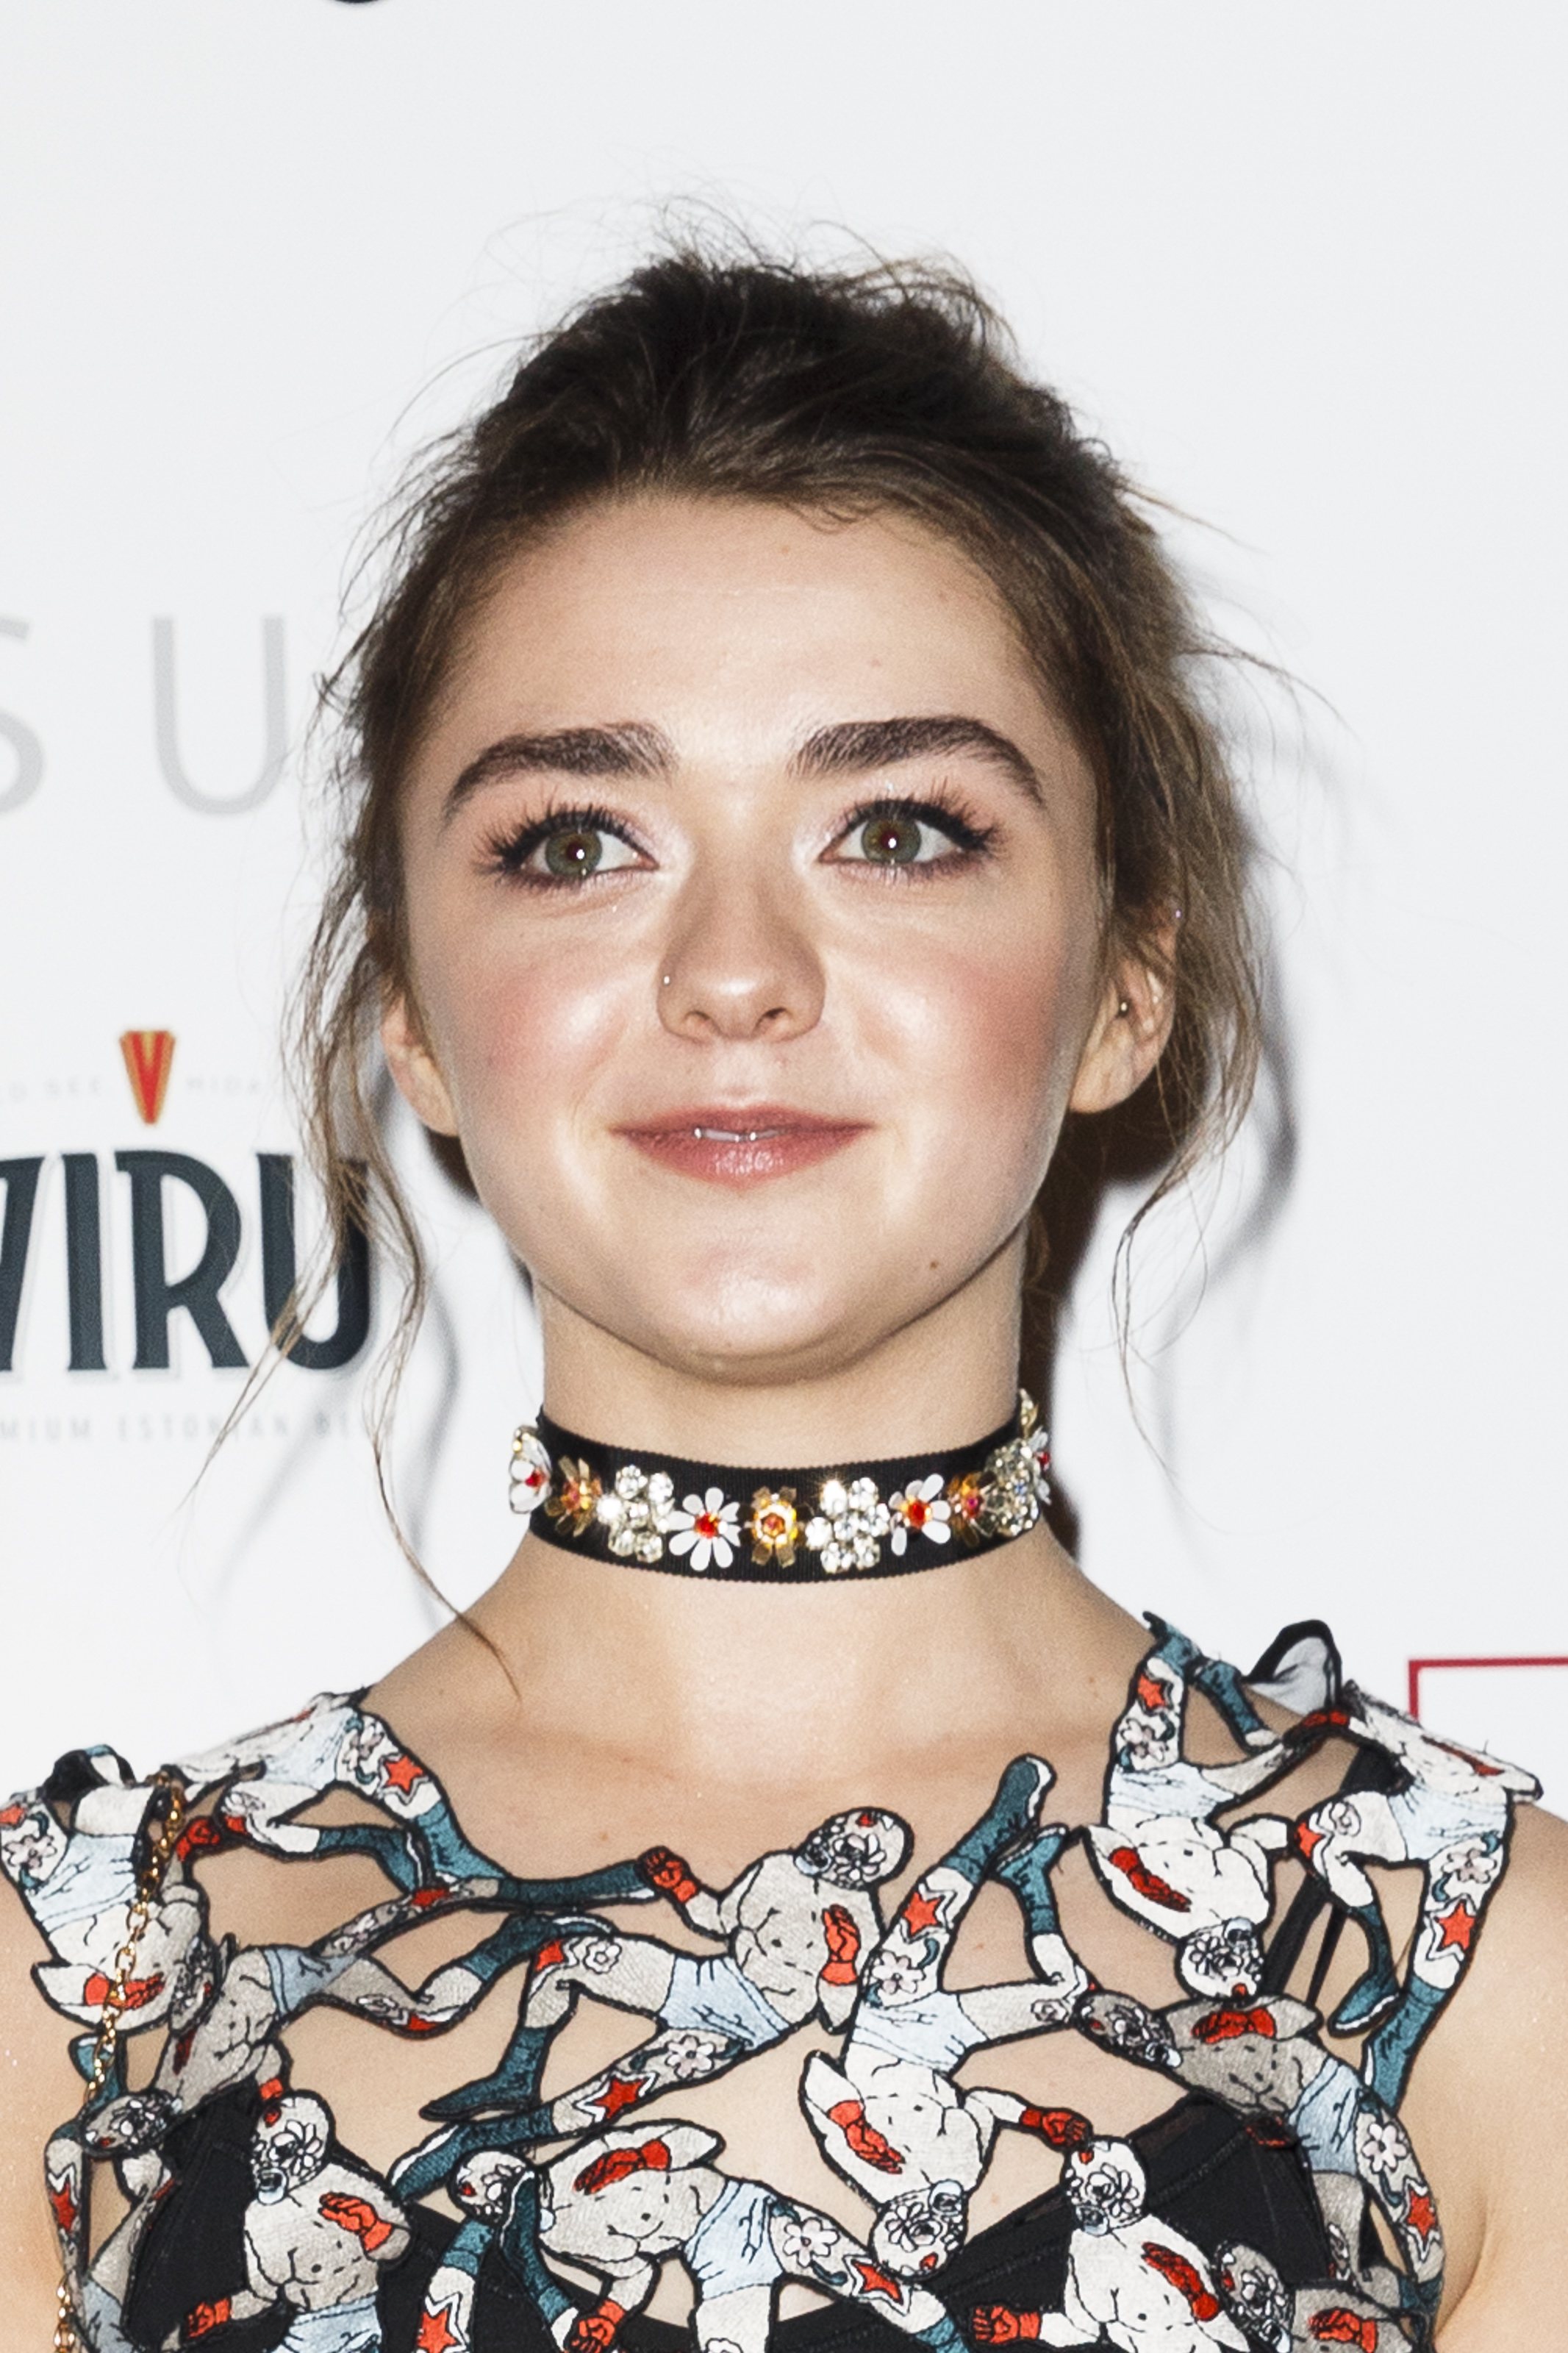 Maisie Williams Latest Red Carpet Dress May Be Her Quirkiest Look Yet